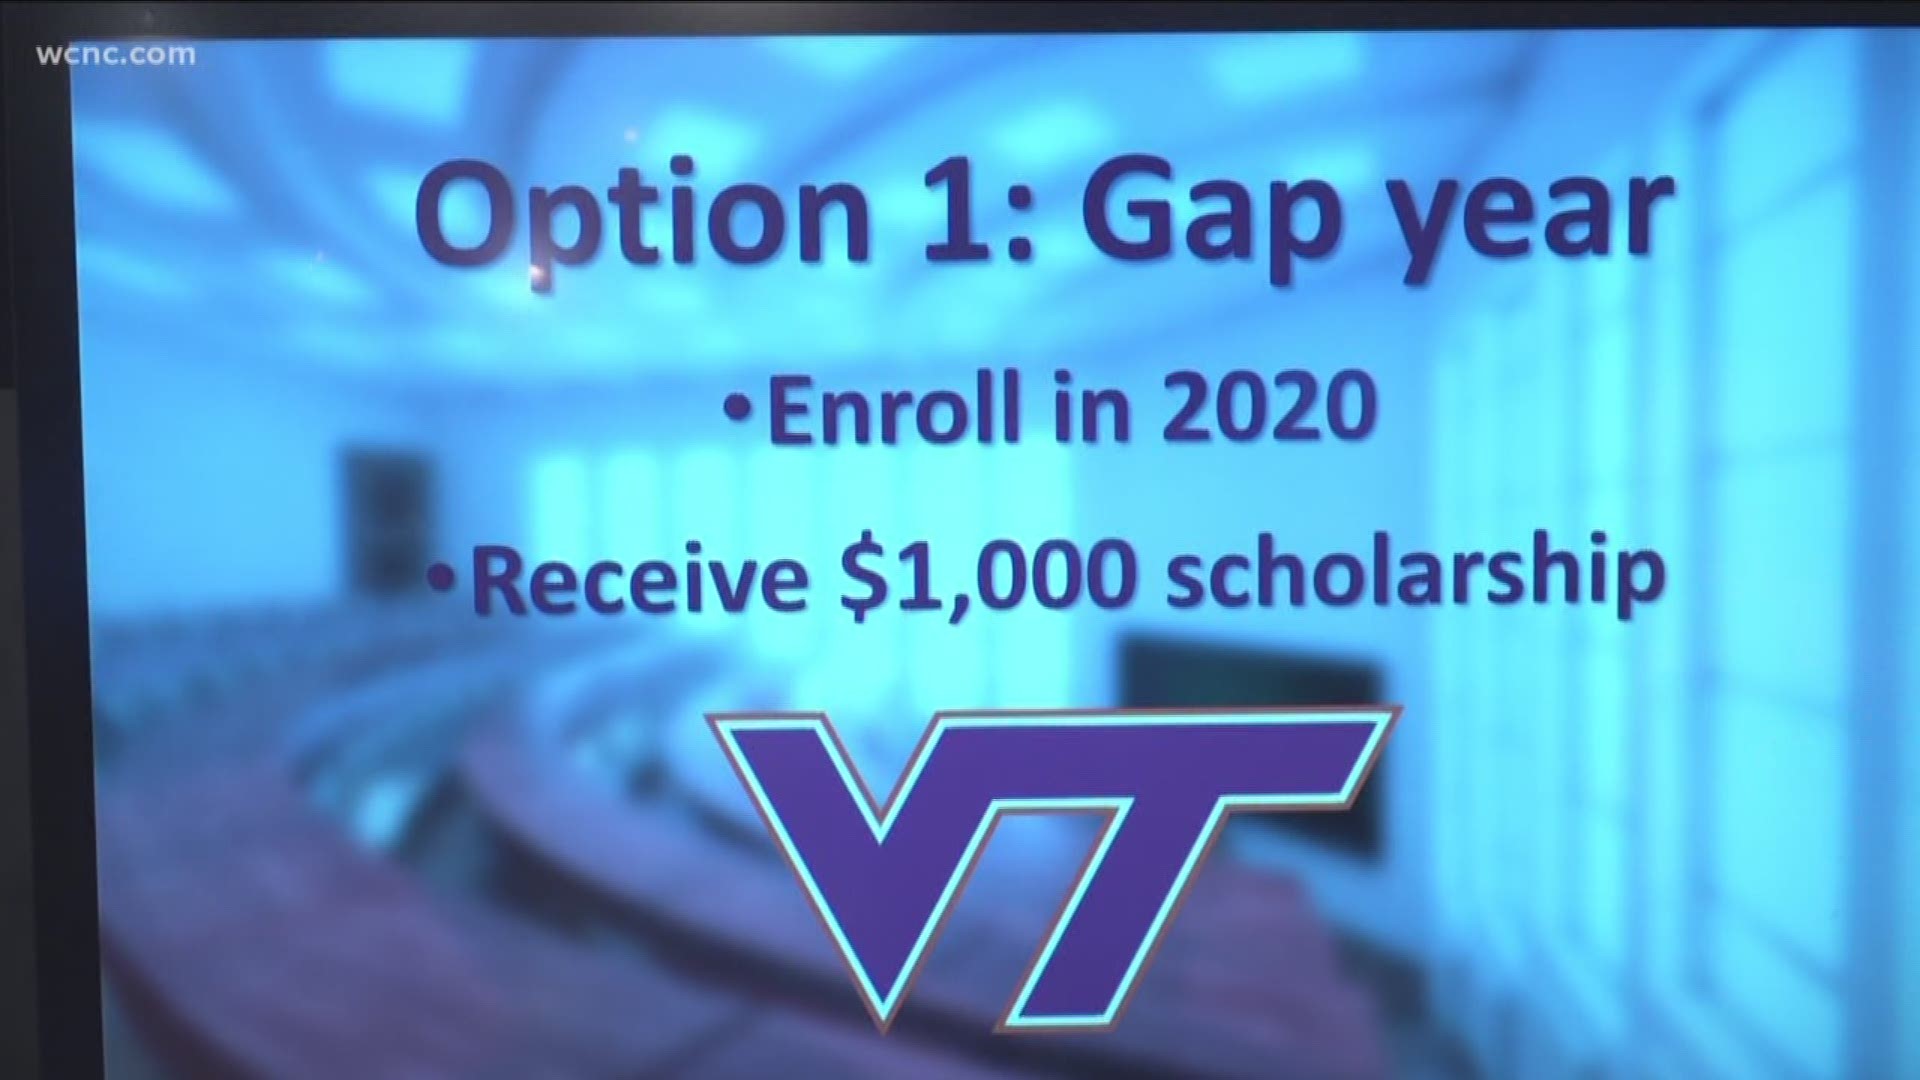 Virginia Tech announced it accepted too many students for the upcoming fall semester. So they're offering students three special options until there's enough room.